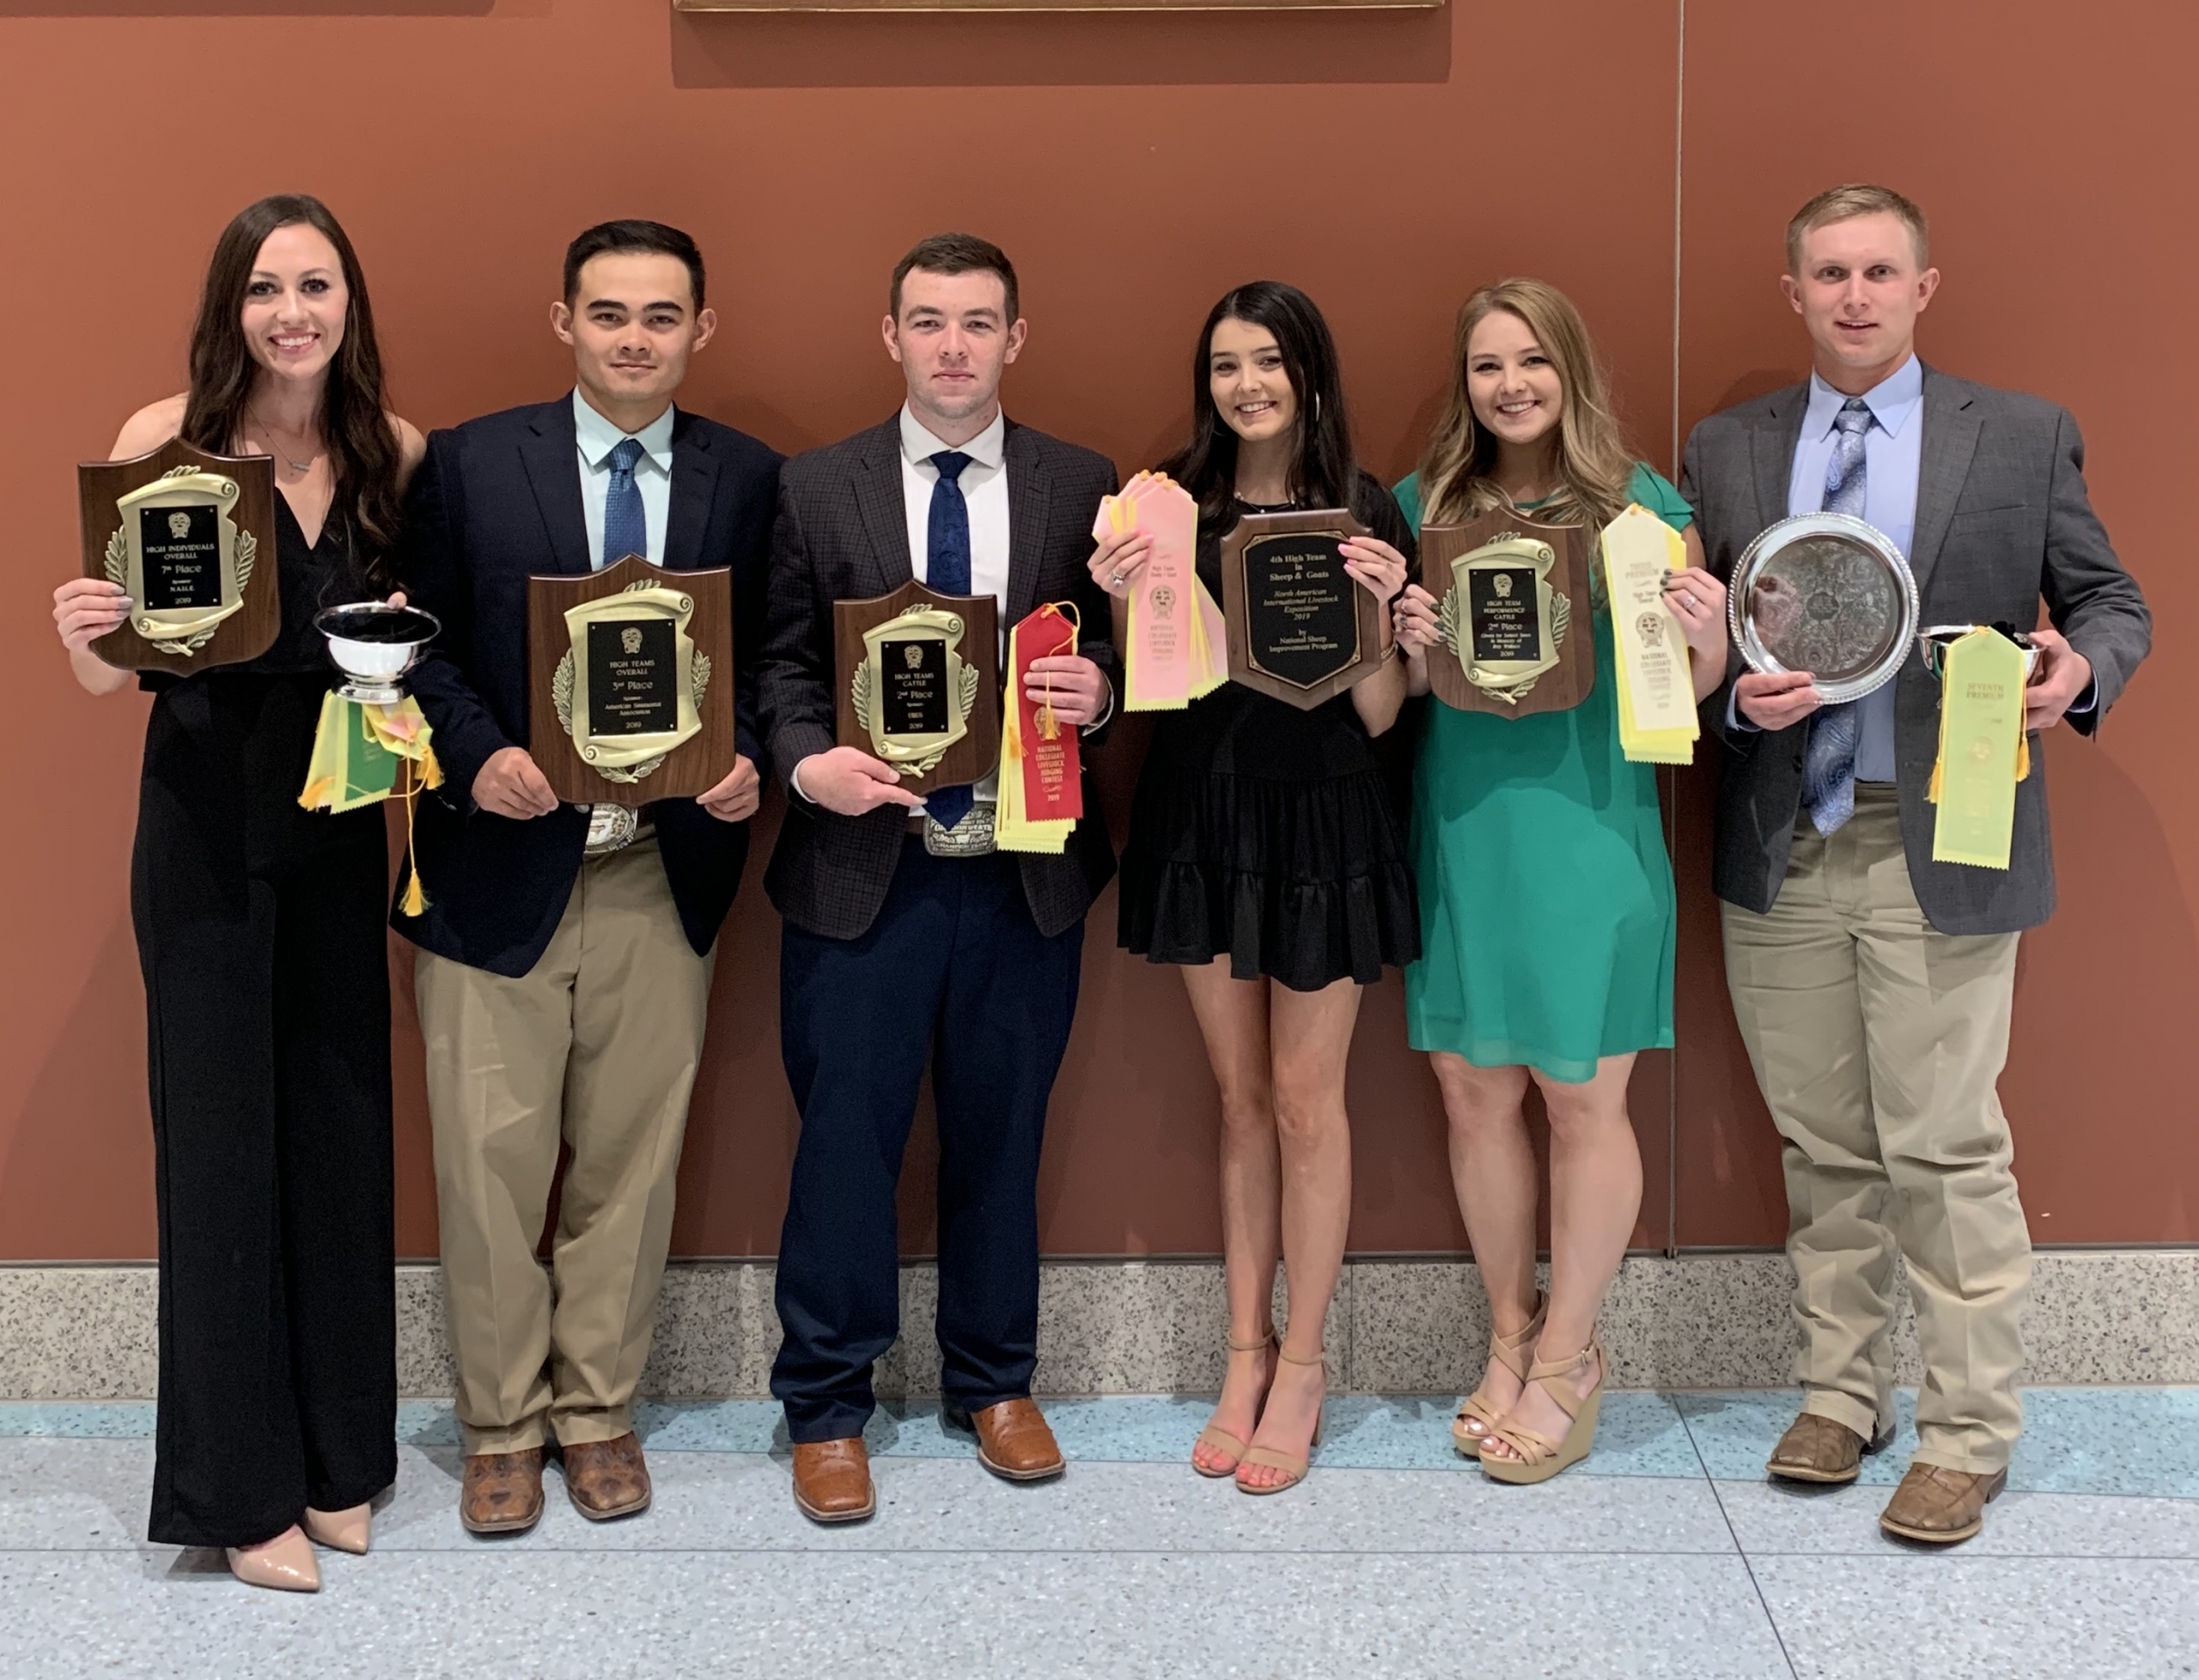 Six college students smile and hold awards.